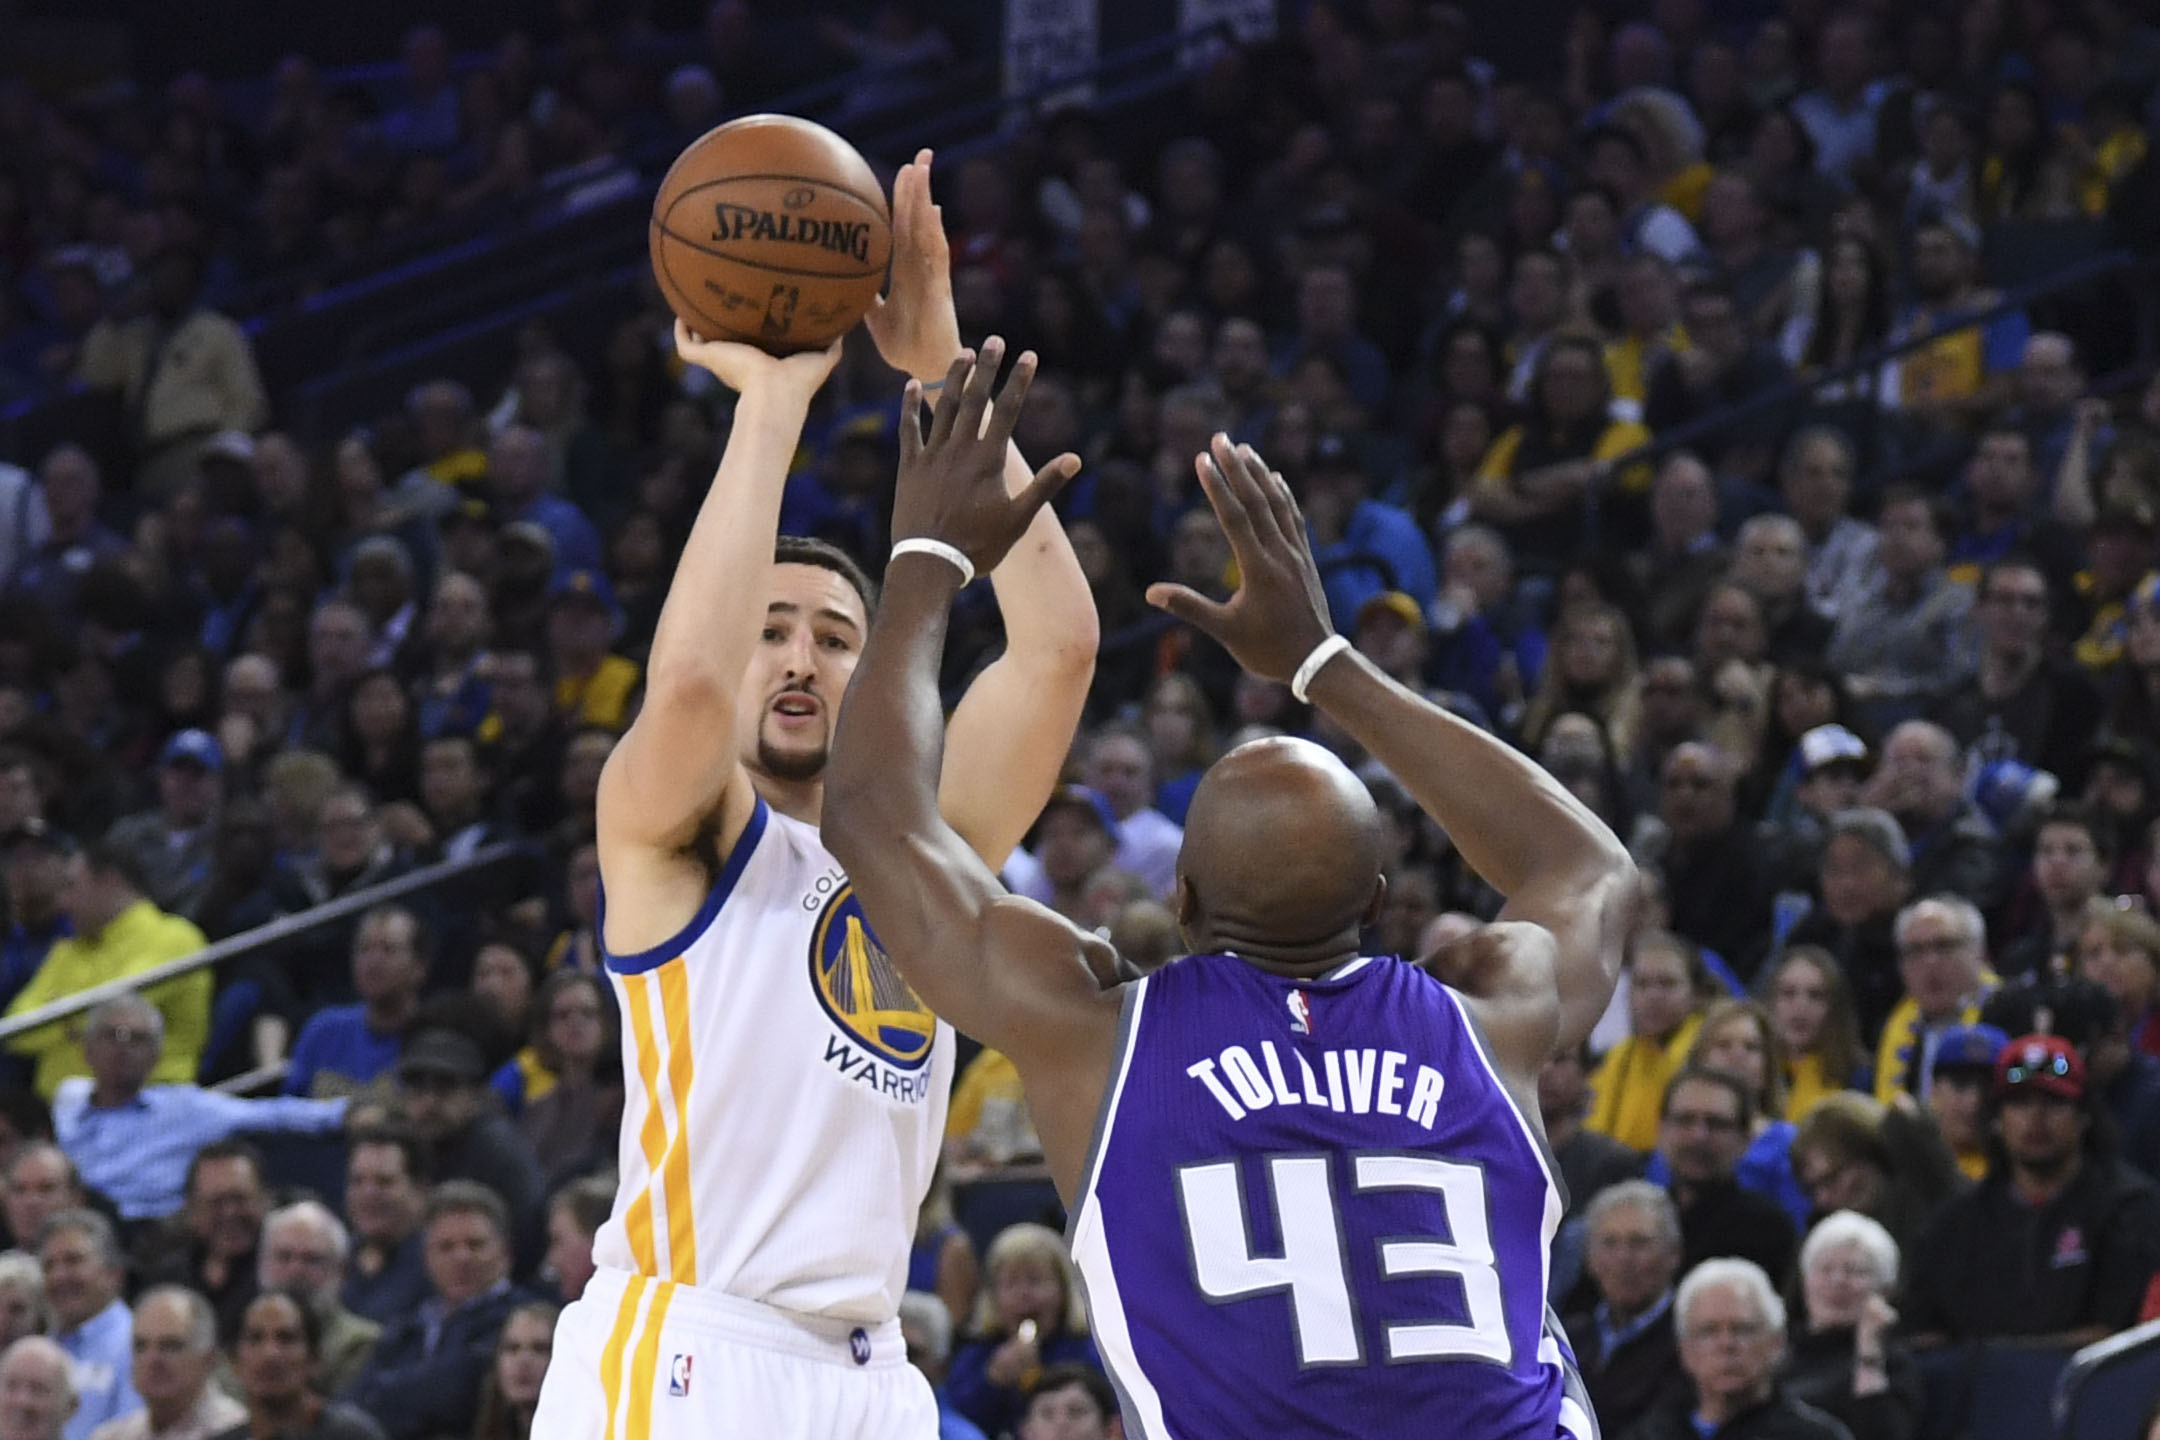 Kings at Warriors live stream: How to watch online